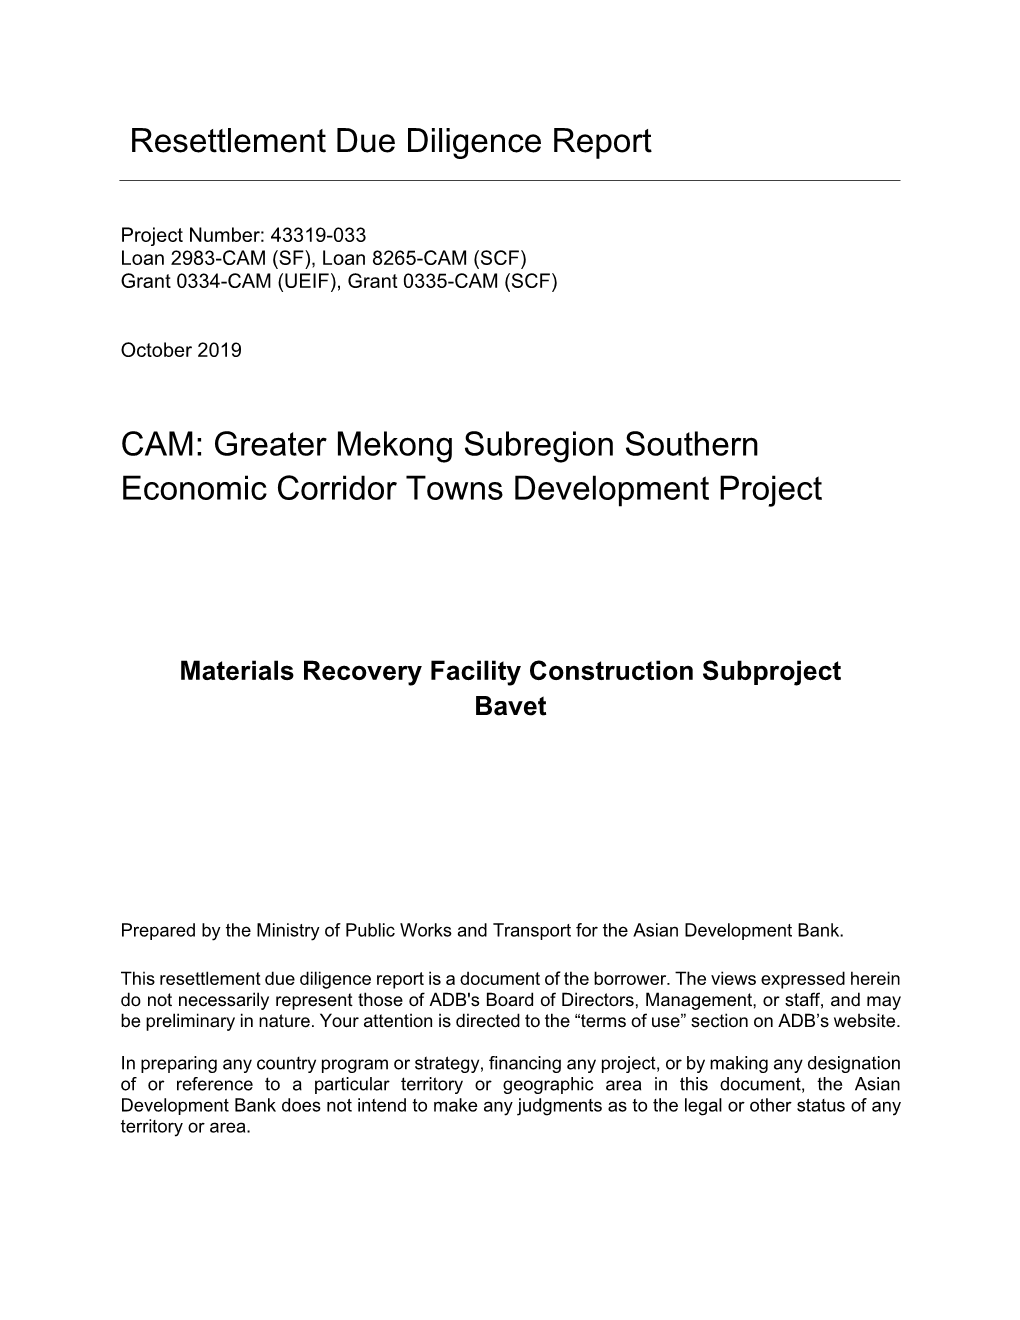 Greater Mekong Subregion Southern Economic Corridor Towns Development Project